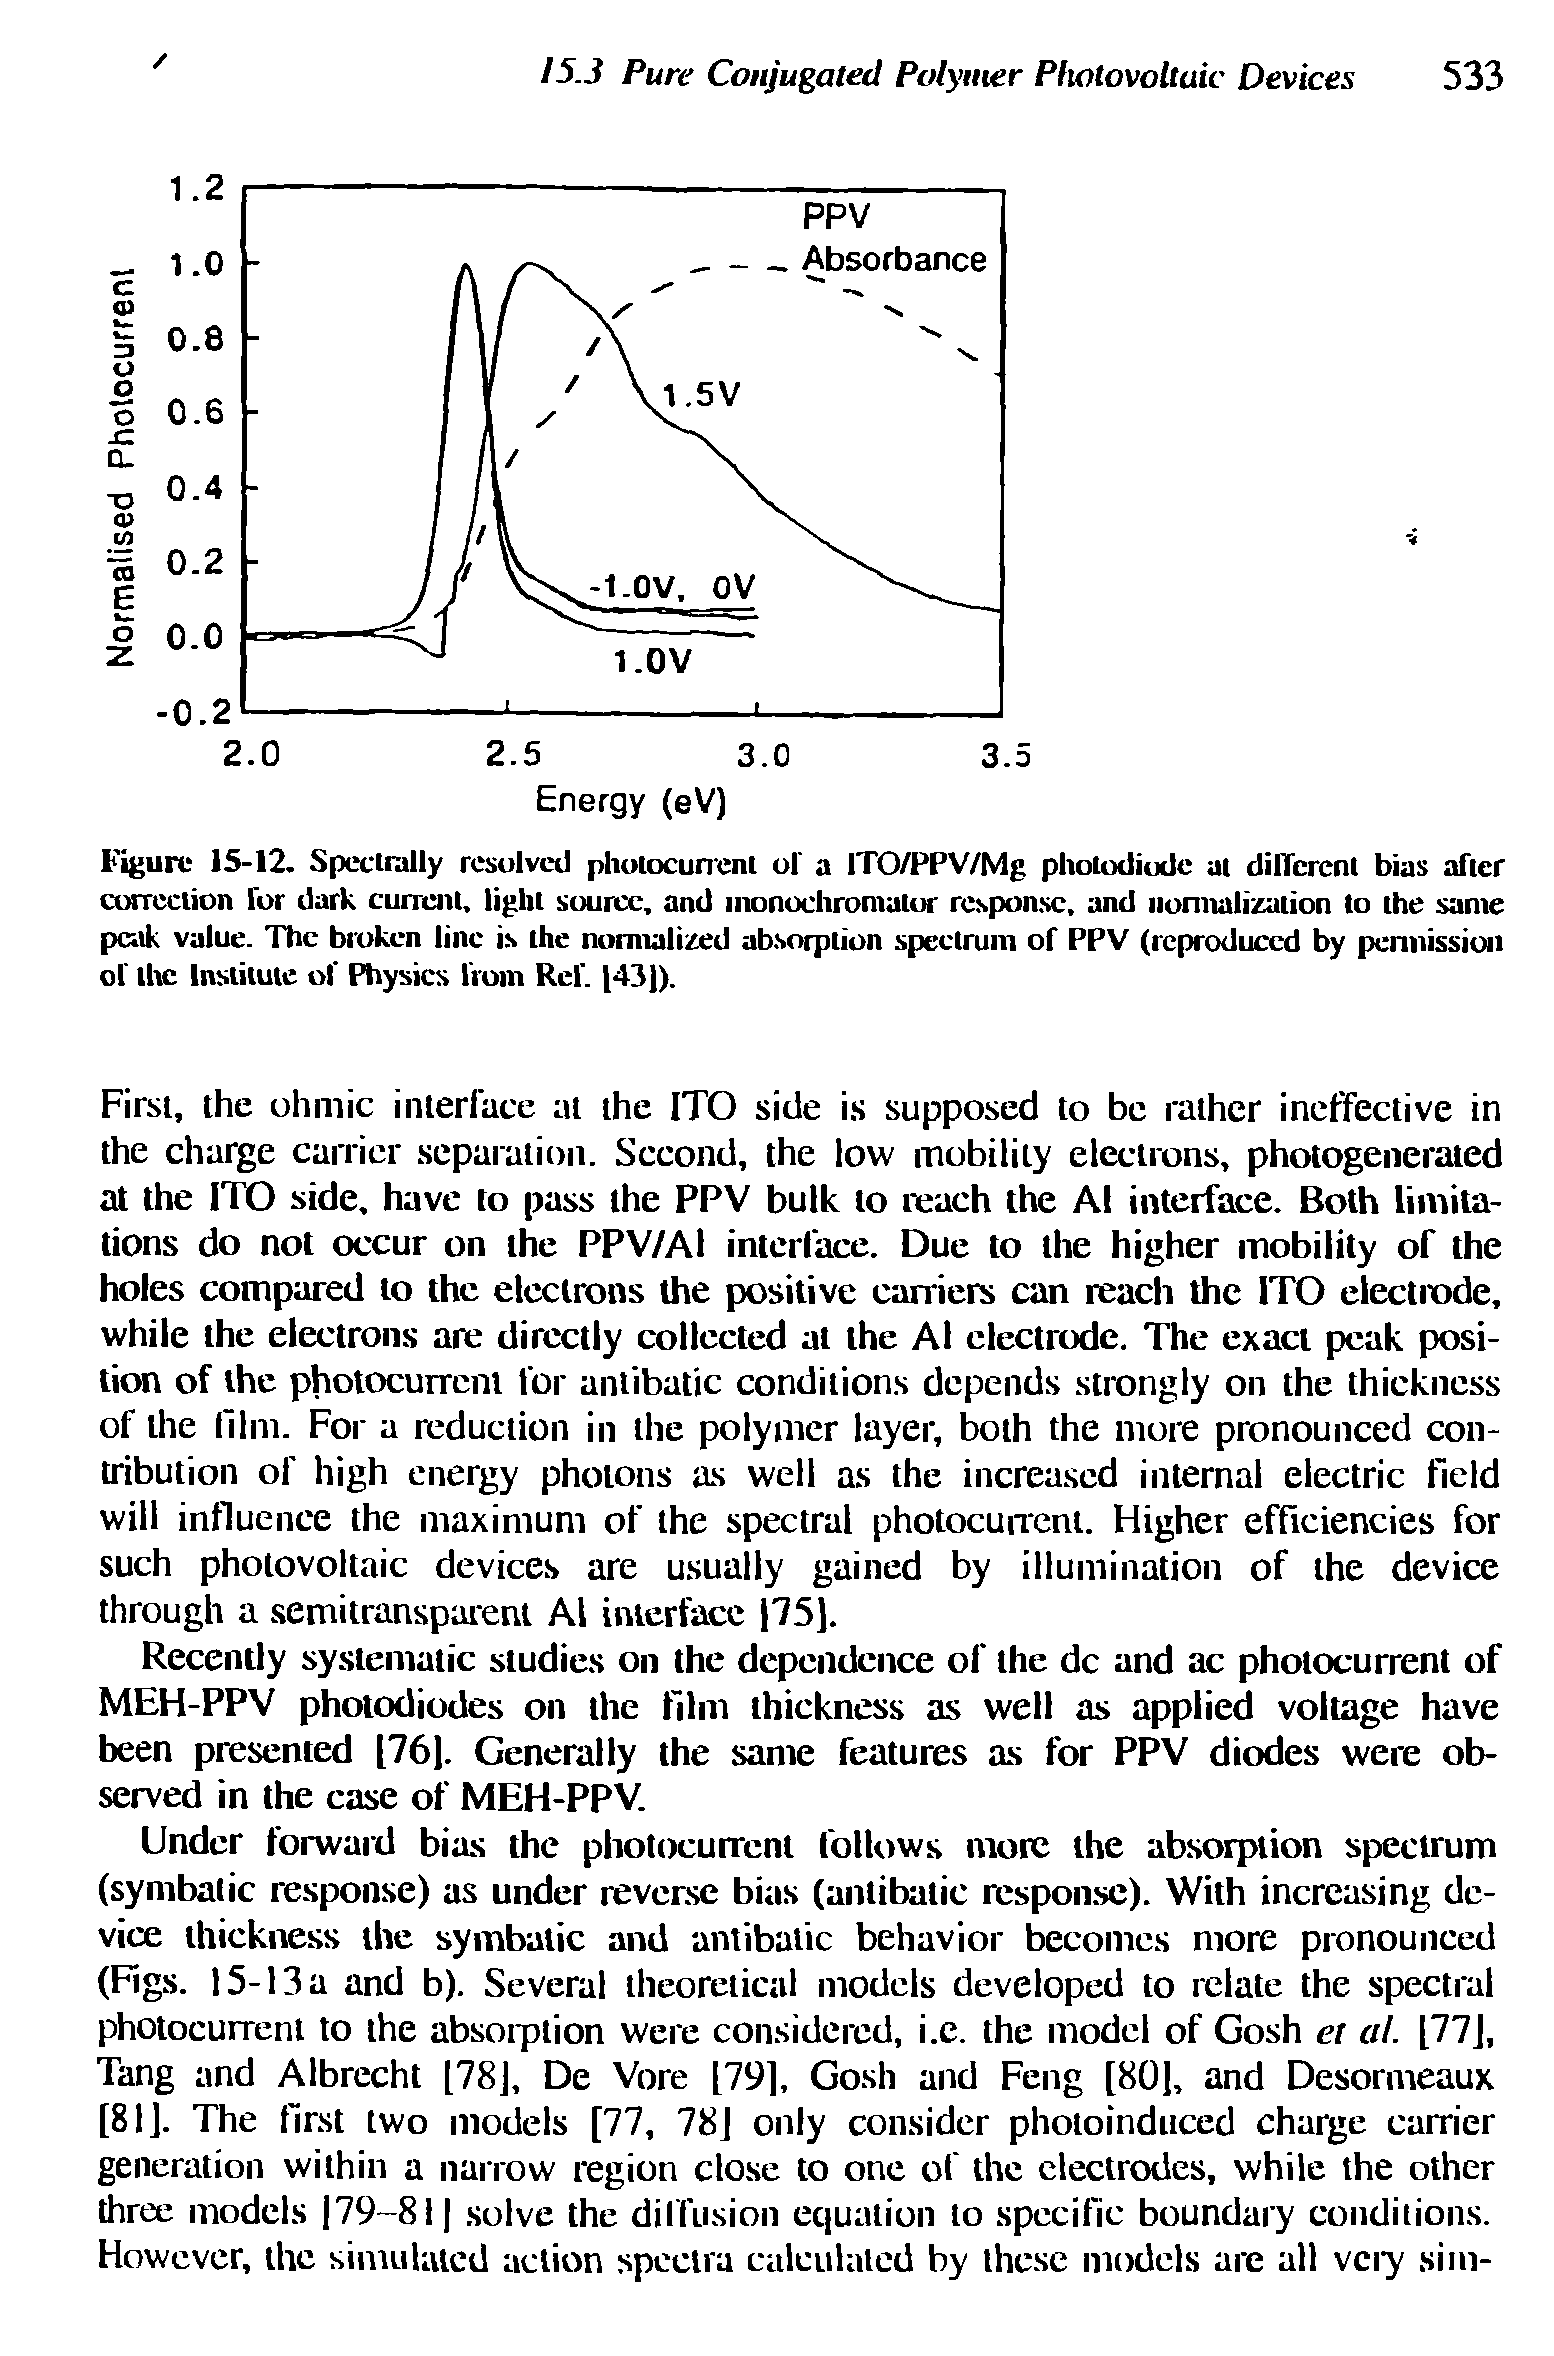 Figure 15-12. Spectrally resolved pliotocurrent of a ITO/PPV/Mg photodiode at dilTcrcnt bias after correction for dark current, light source, and monochromator response, and normalization to the same peak value. The broken line is the normalized absorption spectrum of PPV (reproduced by permission of the Institute of Physics from Ref. 143)).